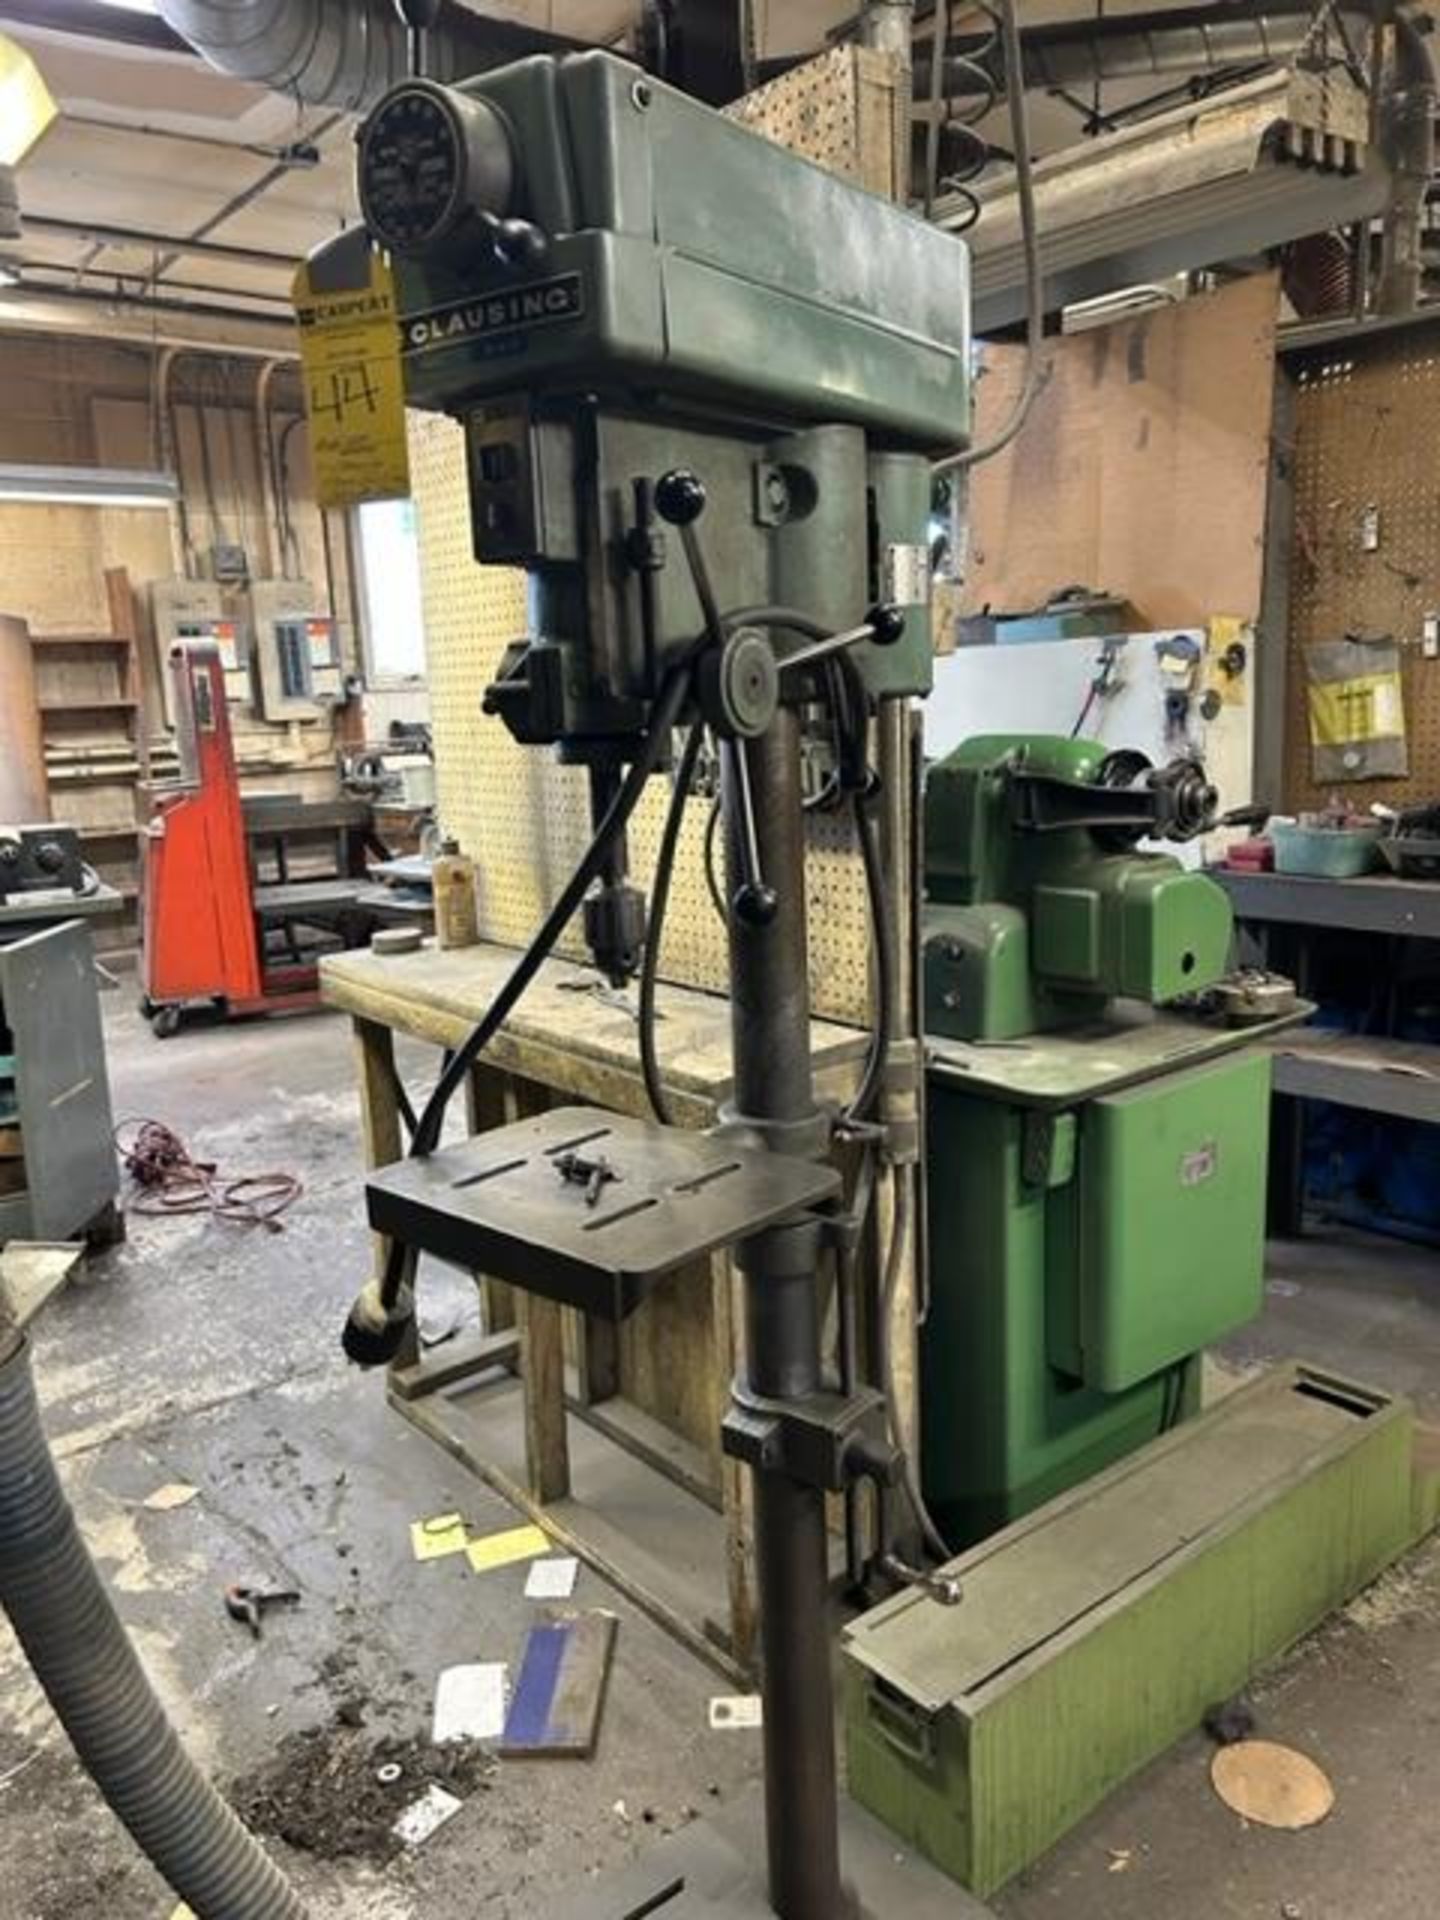 Clausing Floor Drill Press Spindle Speed, M: 1689, SN: 516852